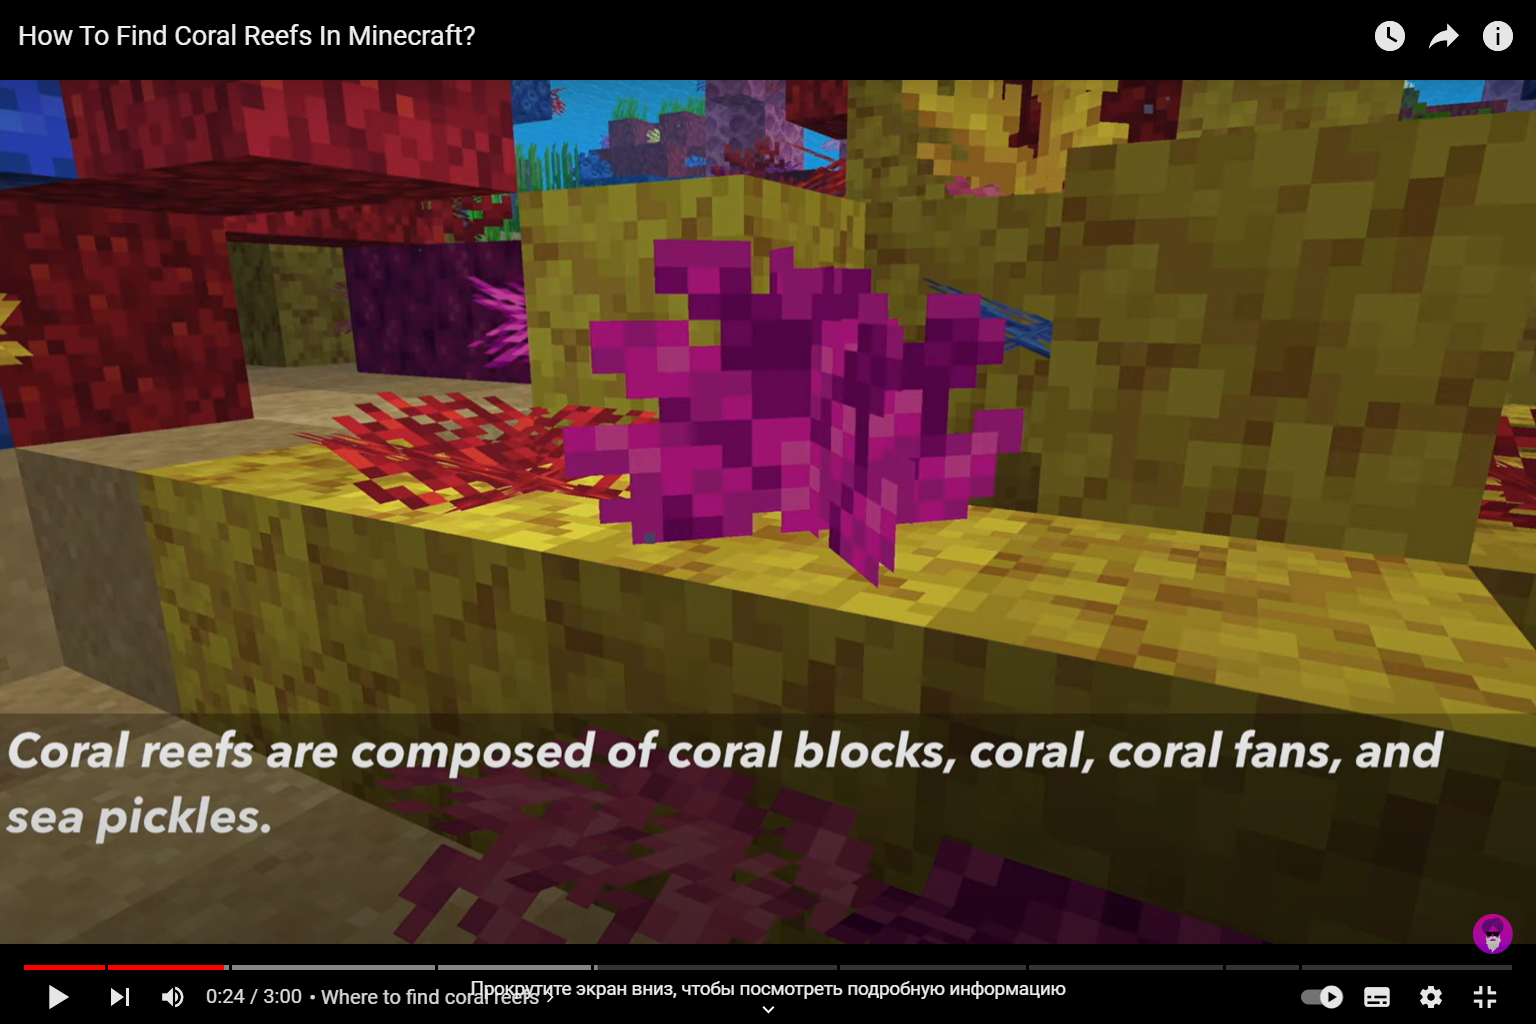 Coral reef in Minecraft